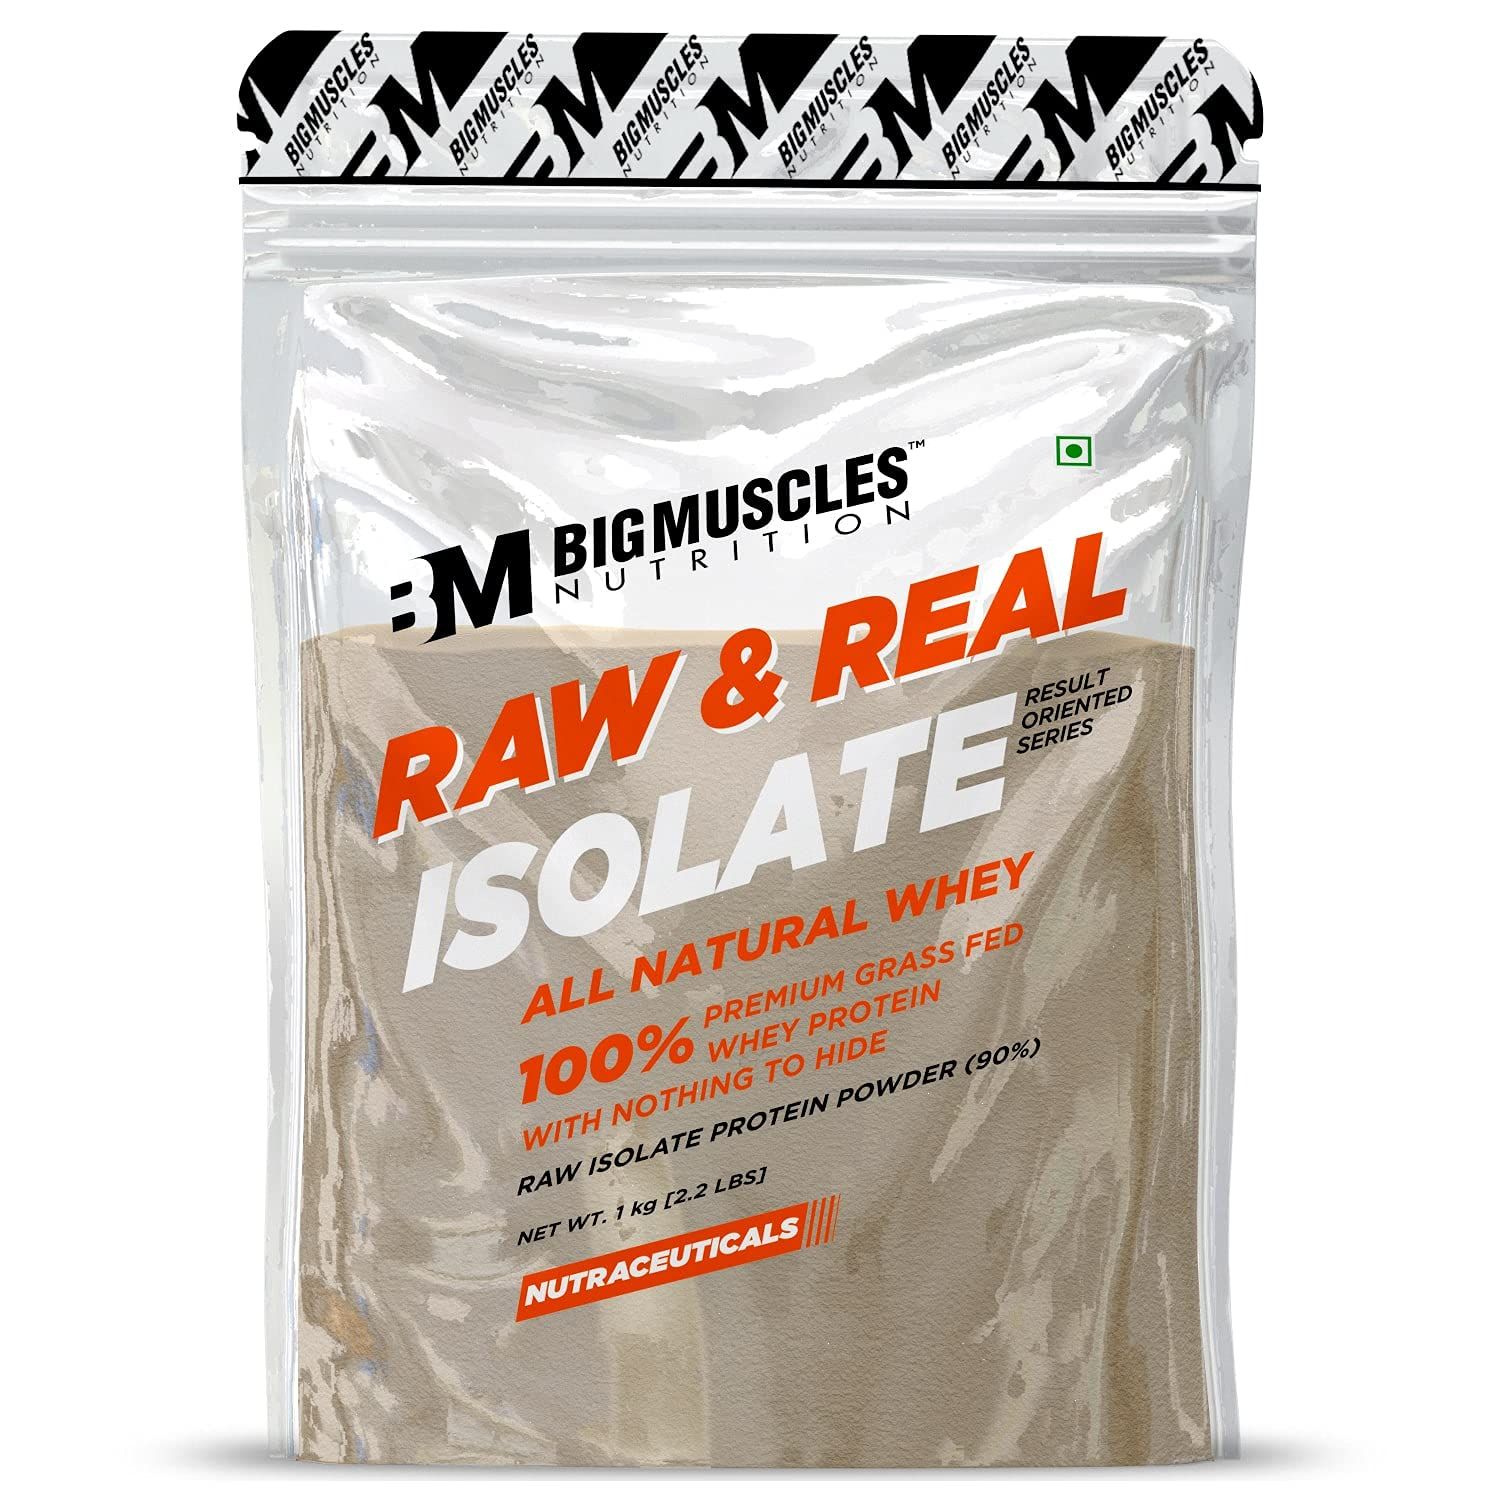 BigMuscles Nutrition Raw & Real Isolate Image